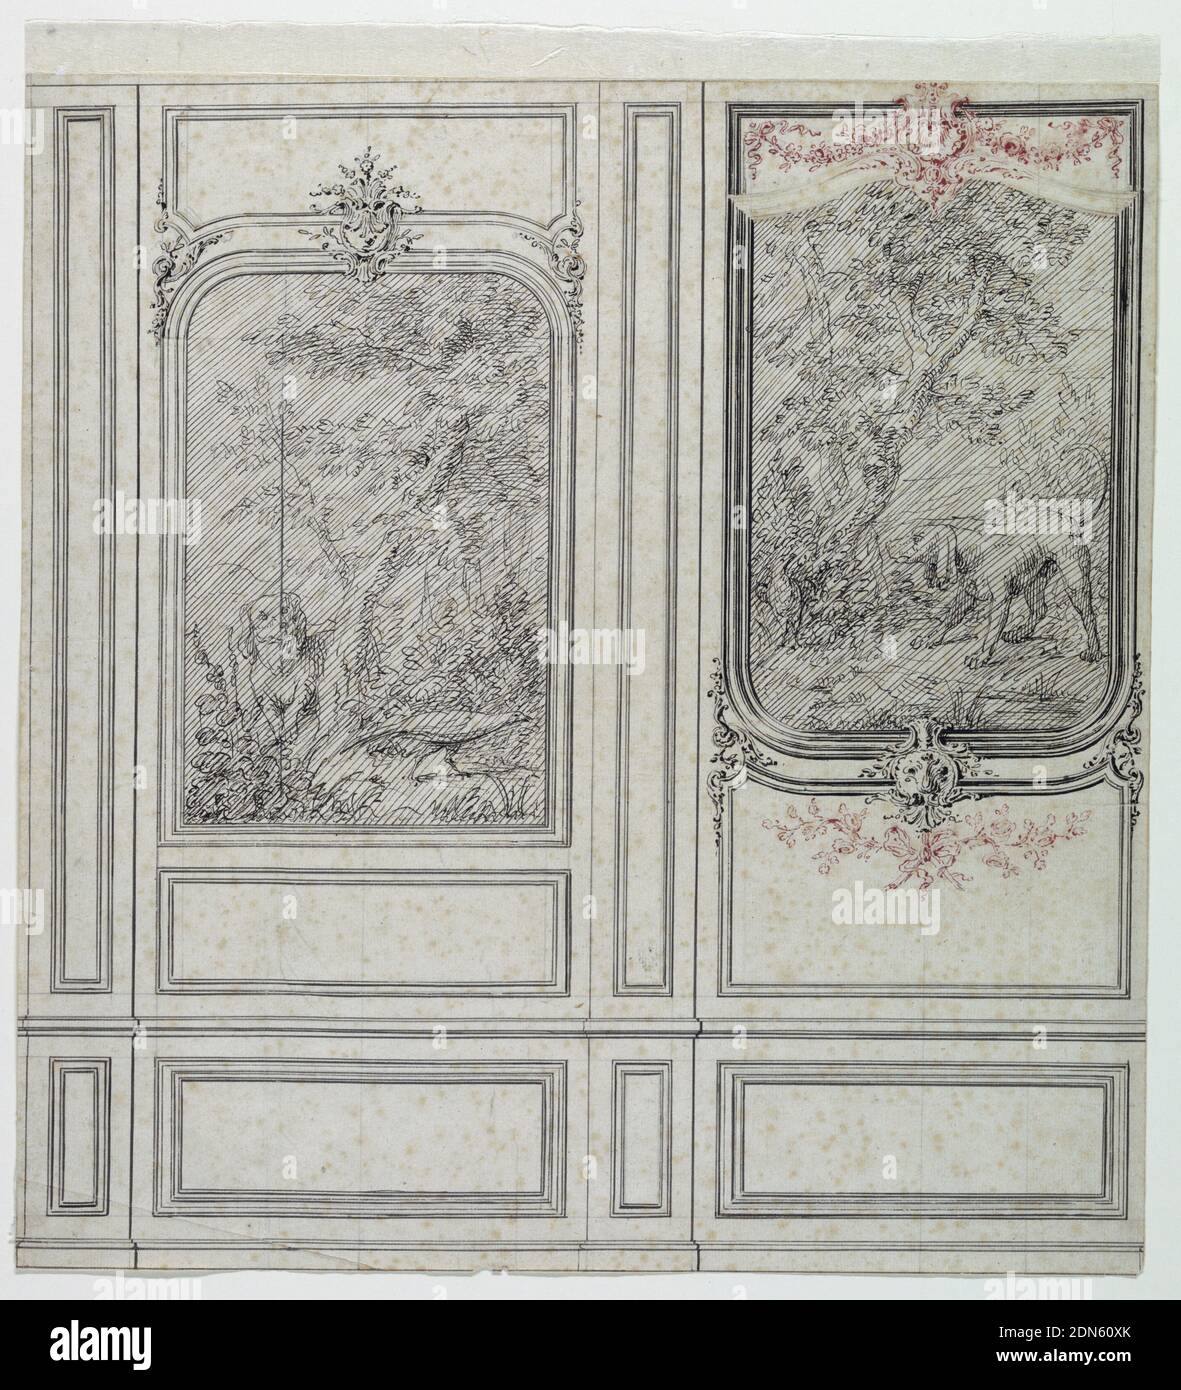 Design for a Room, Pen and red and black ink, graphite on paper, Two bays  are shown, each containing a representation of a hunting dog and a bird in  a setting of